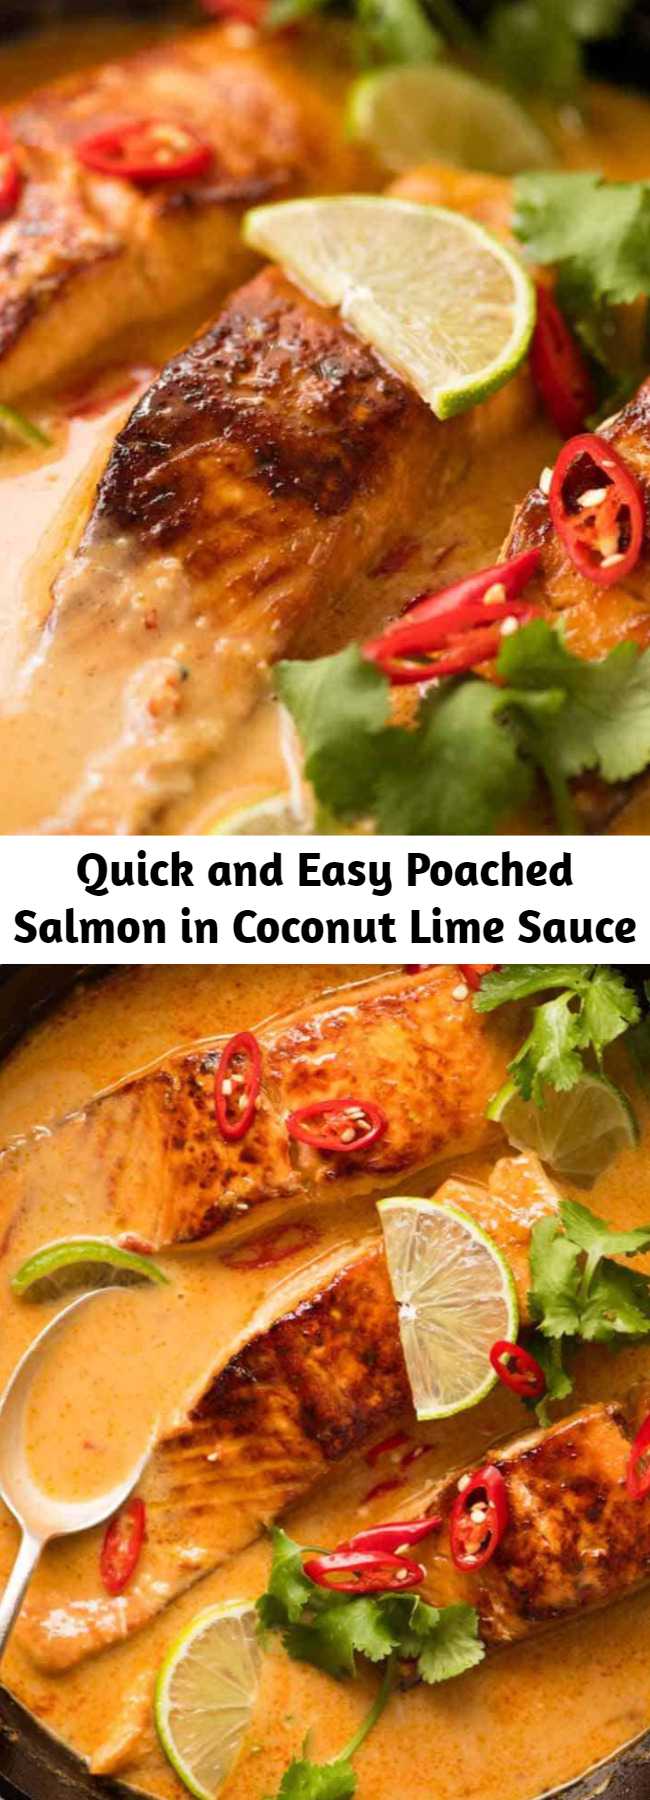 Quick and Easy Poached Salmon in Coconut Lime Sauce - Poached Salmon in a coconut lime sauce that tastes like a Thai coconut curry - except it's super quick and easy to make! Even though the salmon is poached, it's well worth searing lightly to brown for the extra flavour on both the salmon and in the sauce.